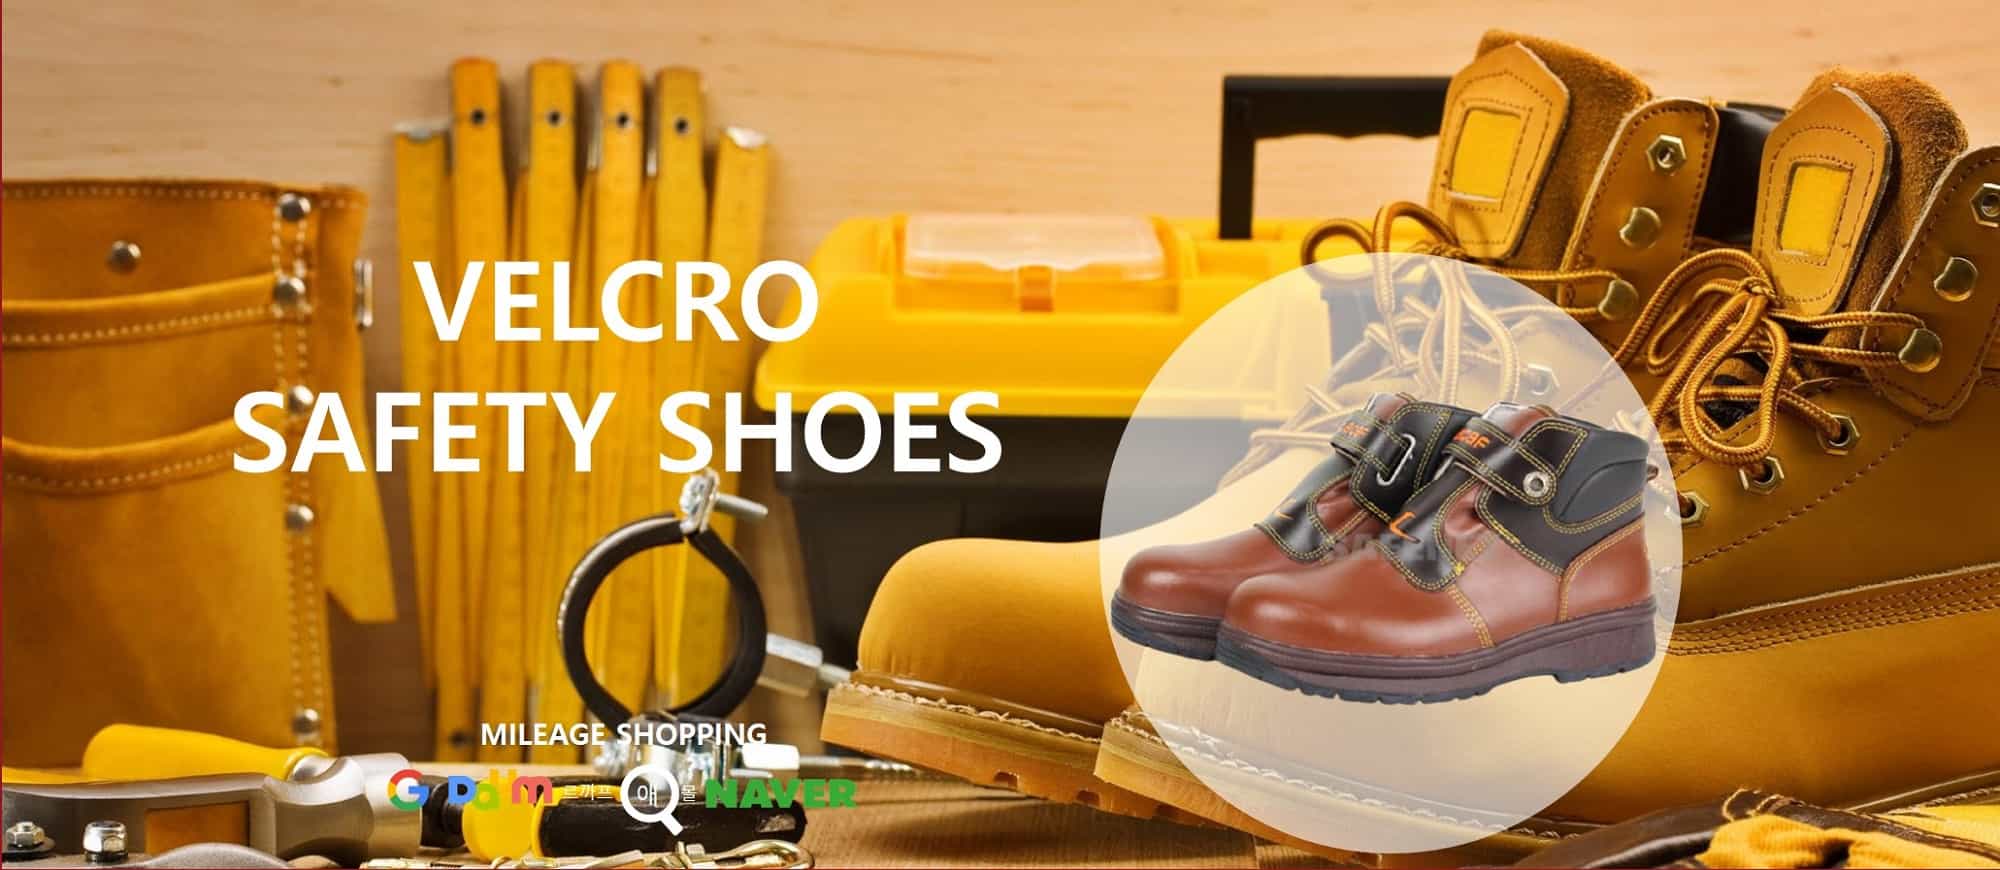 VELCRO  SAFETY SHOES